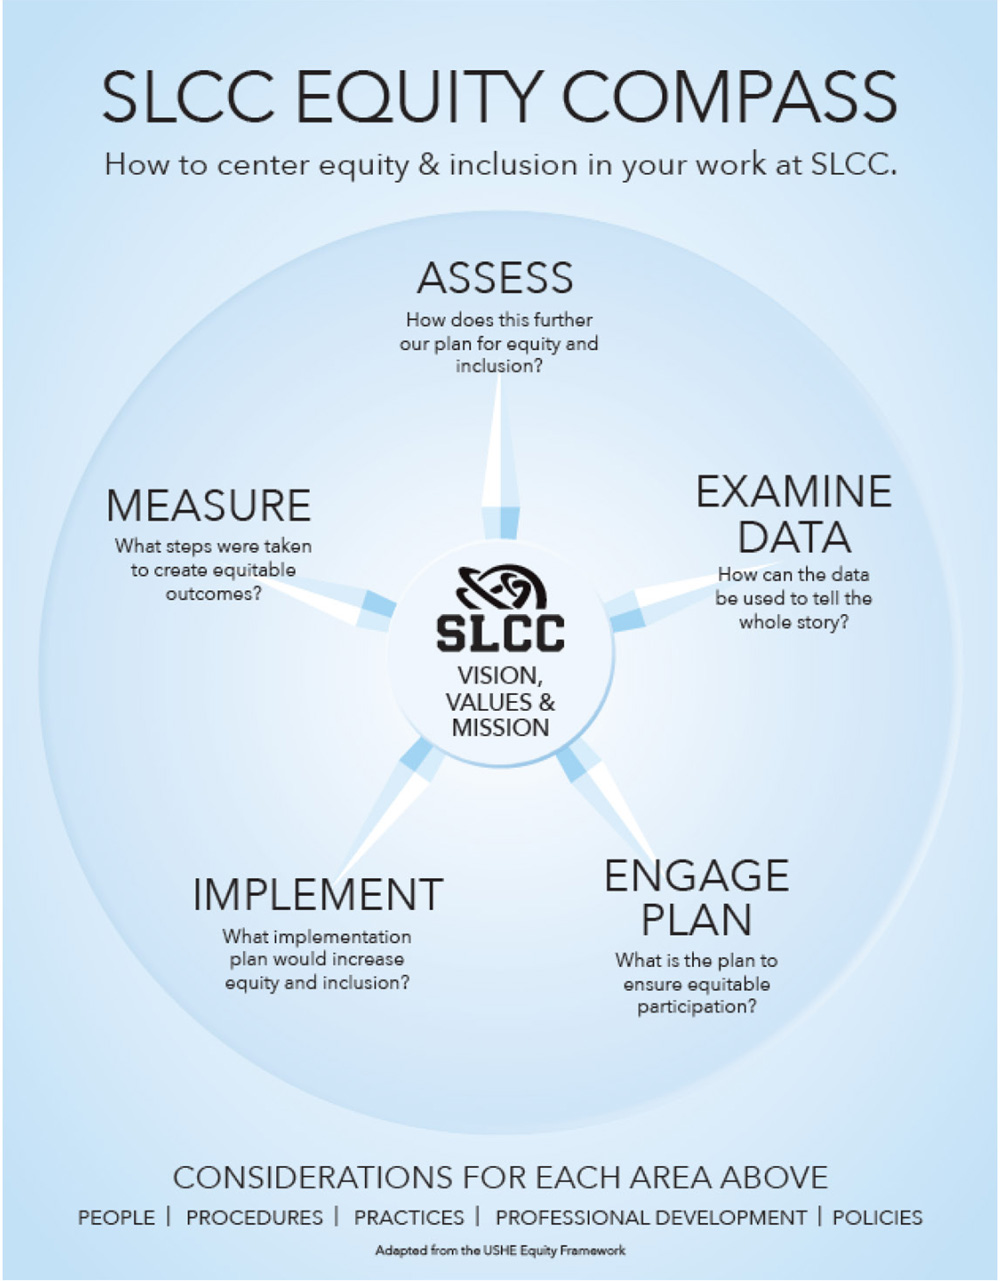 A star with five points, titled "SLCC Equity Compass: How to center equity & inclusion in your work at SLCC". The points are labelled: "Assess: How does this further our plan for equity and inclusion?" "Examine Data: How can data be used to tell the whole story?" "Engage Plan: What is the plan to ensure equitable participation?" "Implement: What implementation plan would increase equity and inclusion?" "Measure: What steps were taken to create equitable outcomes?"